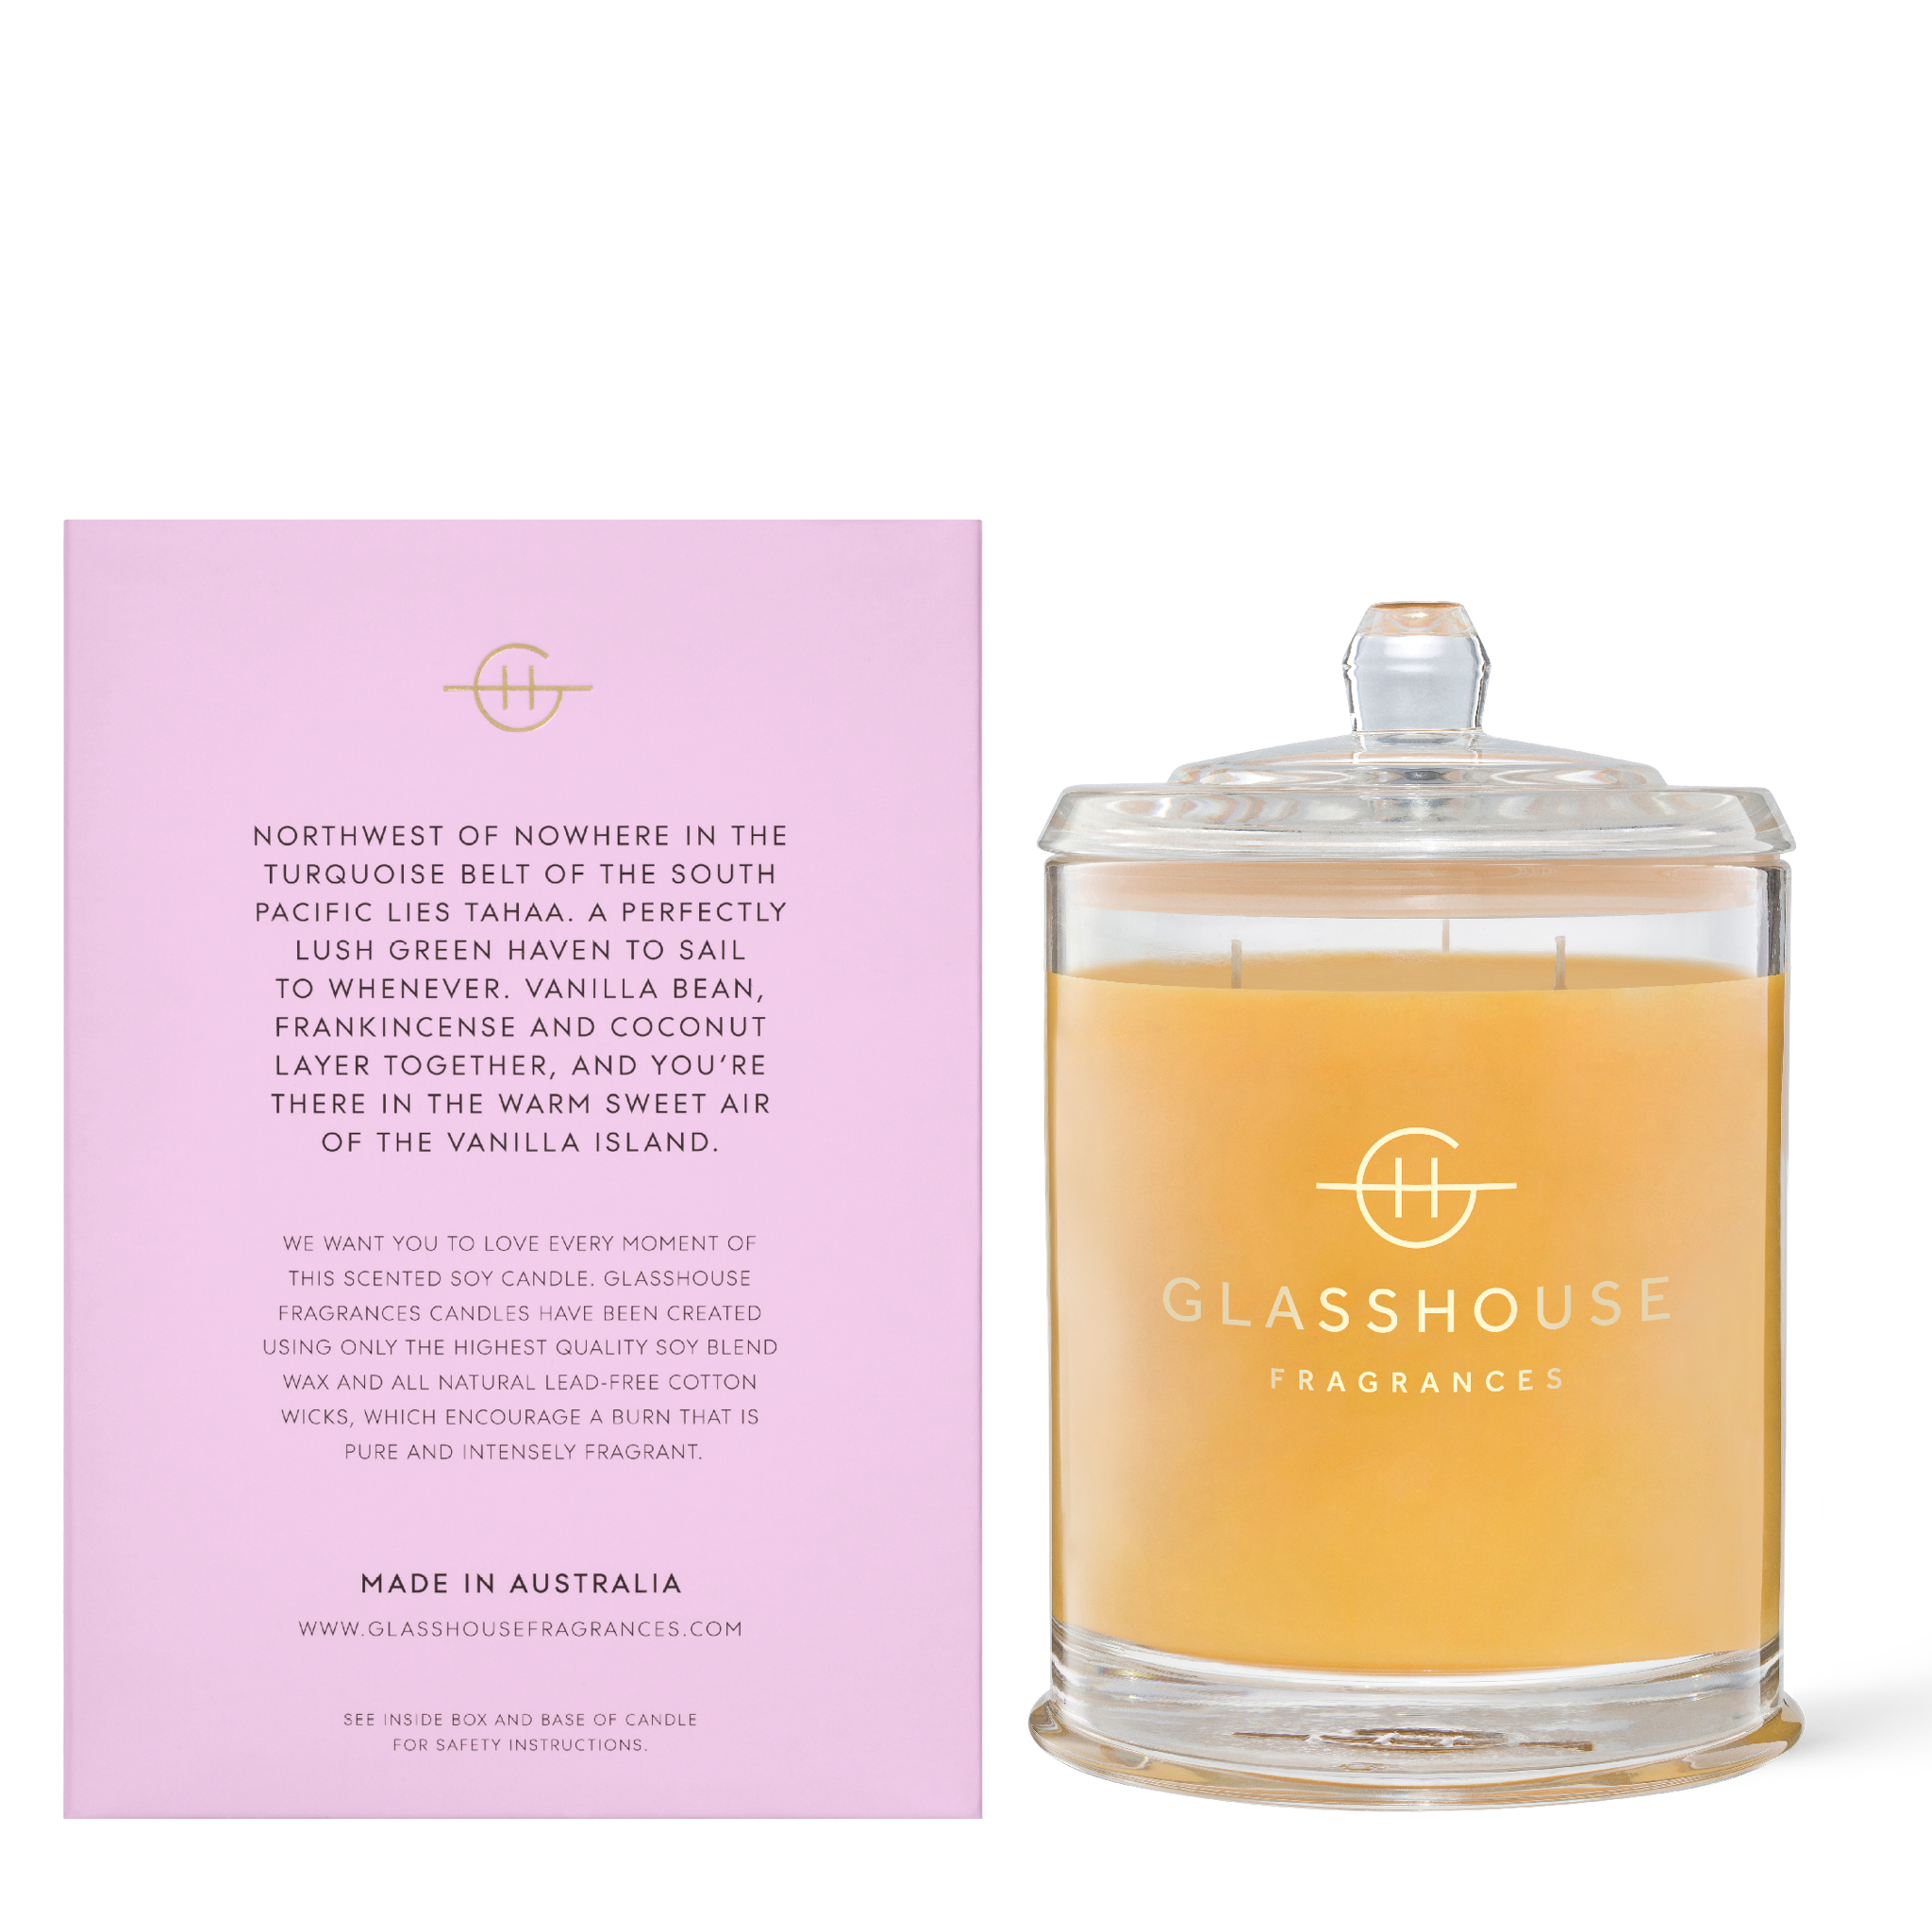 Glasshouse Fragrances A Tahaa Affair Vanilla Caramel 760g Soy Candle with box - Back of product shot